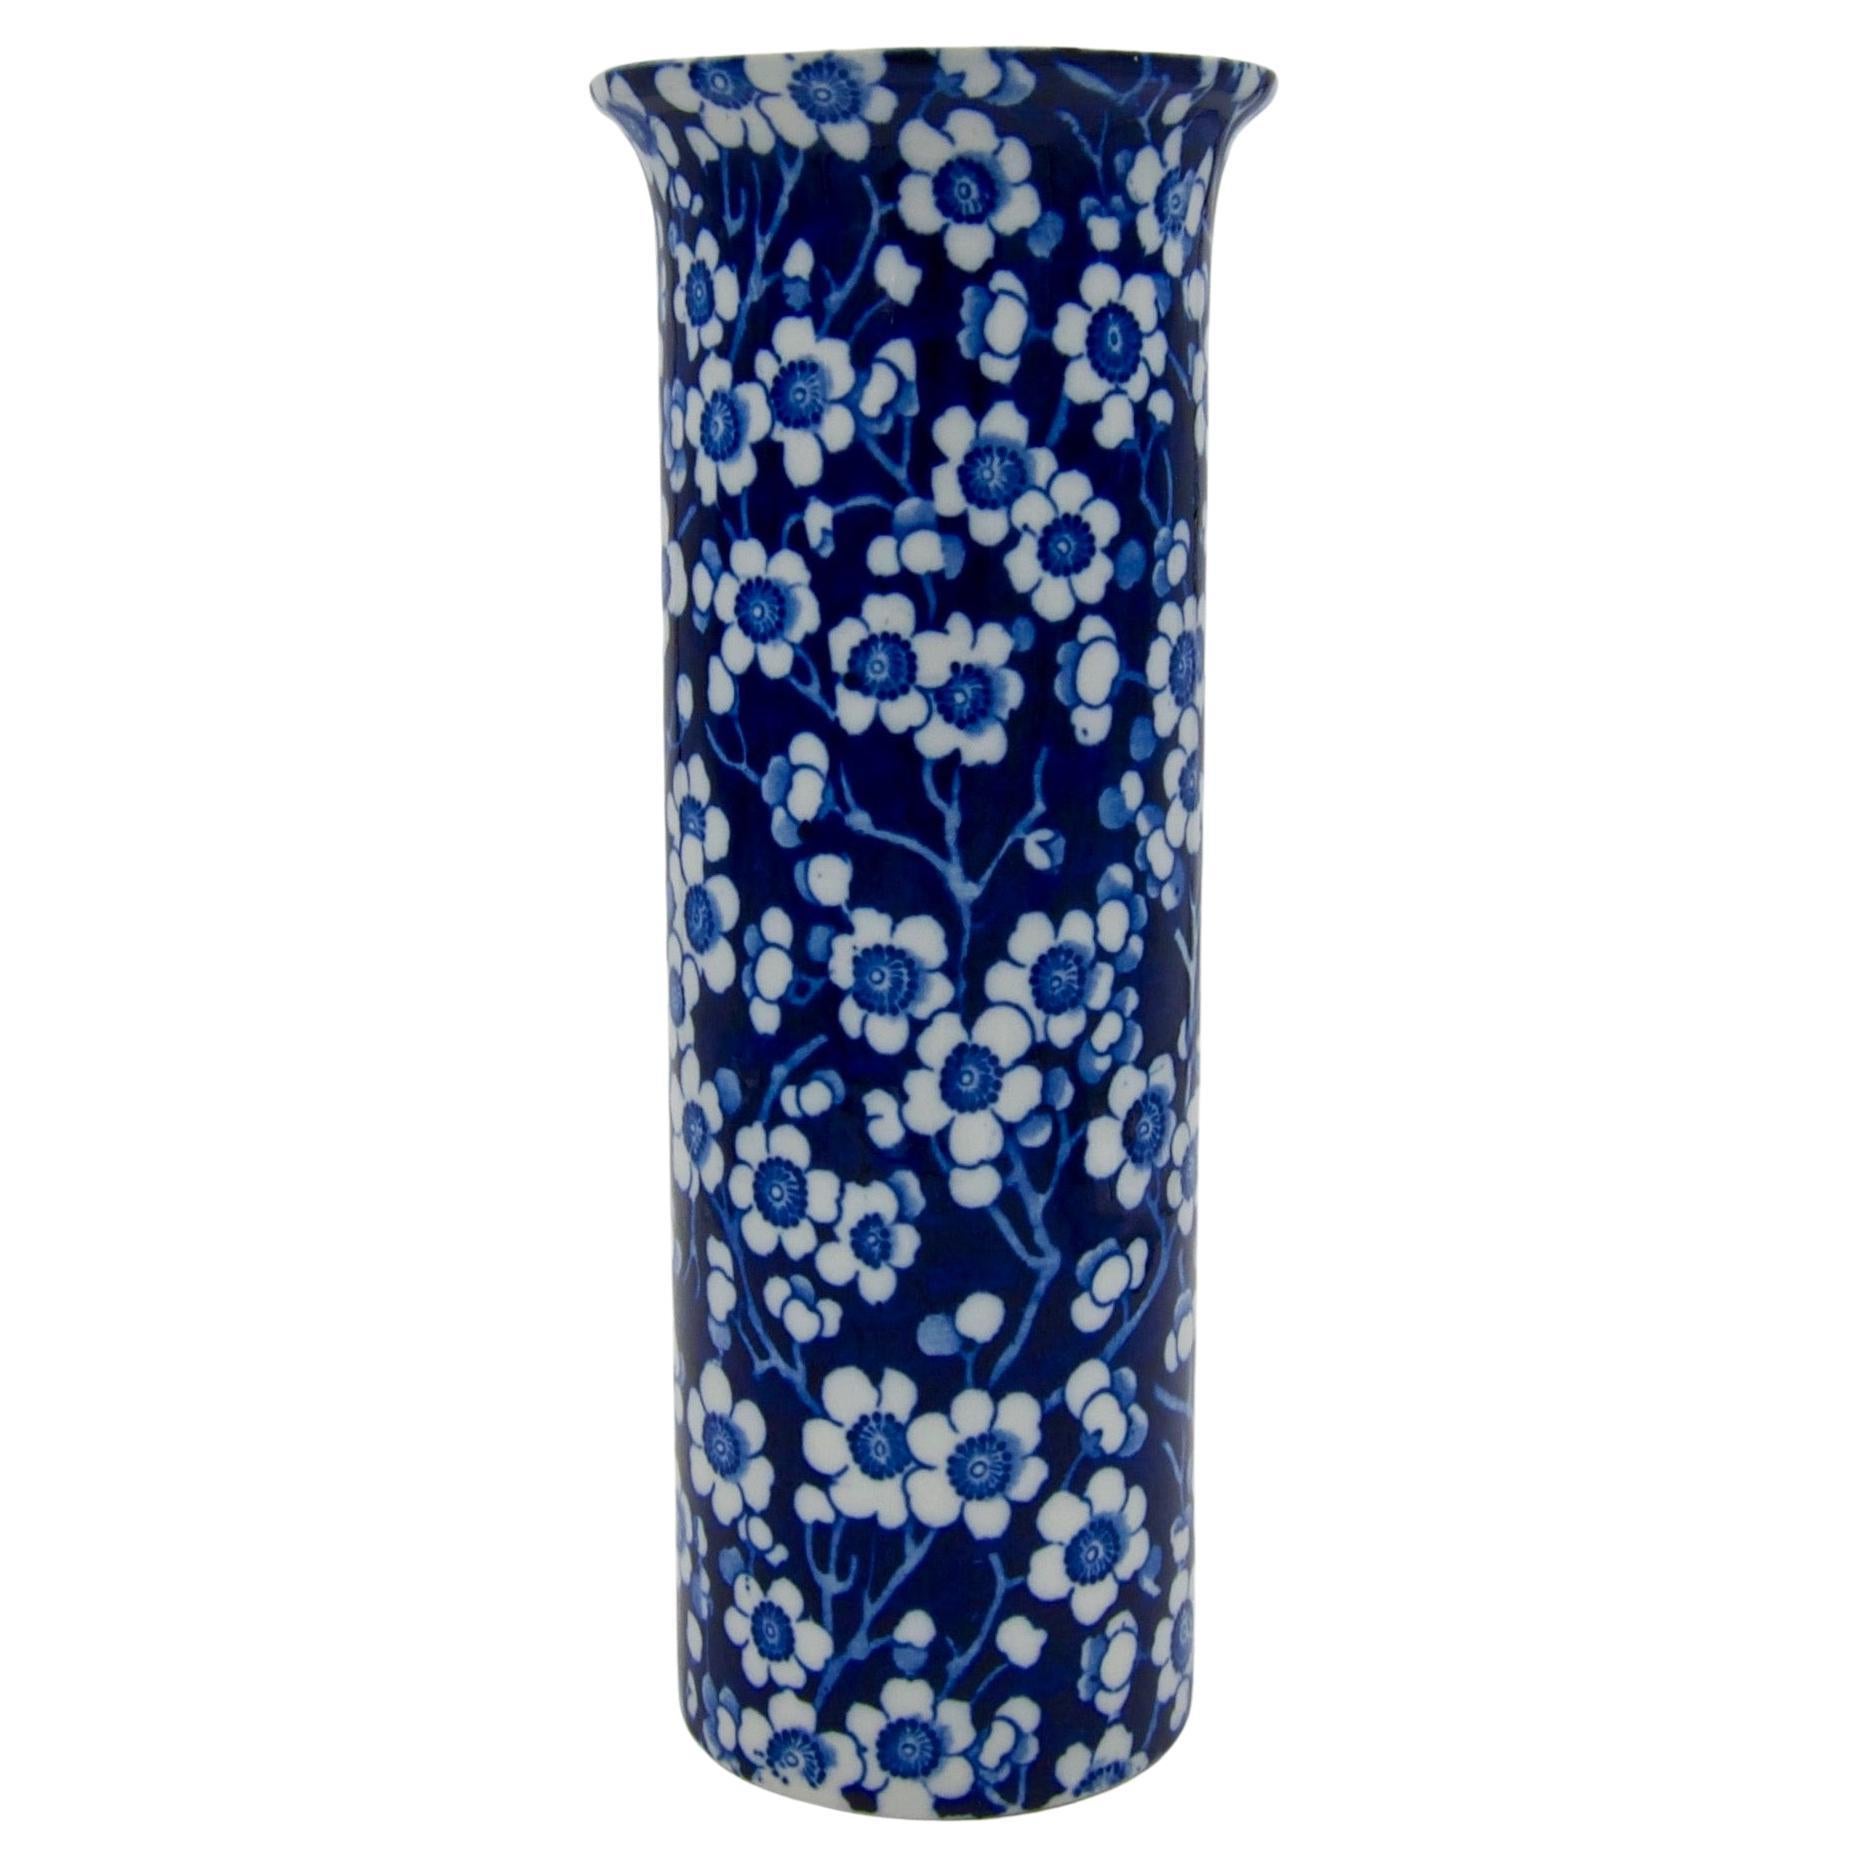 An early 20th century English Prunus vase in earthenware designed by Frederick Rhead for Wood & Sons of England, circa 1910s. Rhead's blue and white version of the Chinese Prunus pattern features a transfer-printed design of white flower blossoms